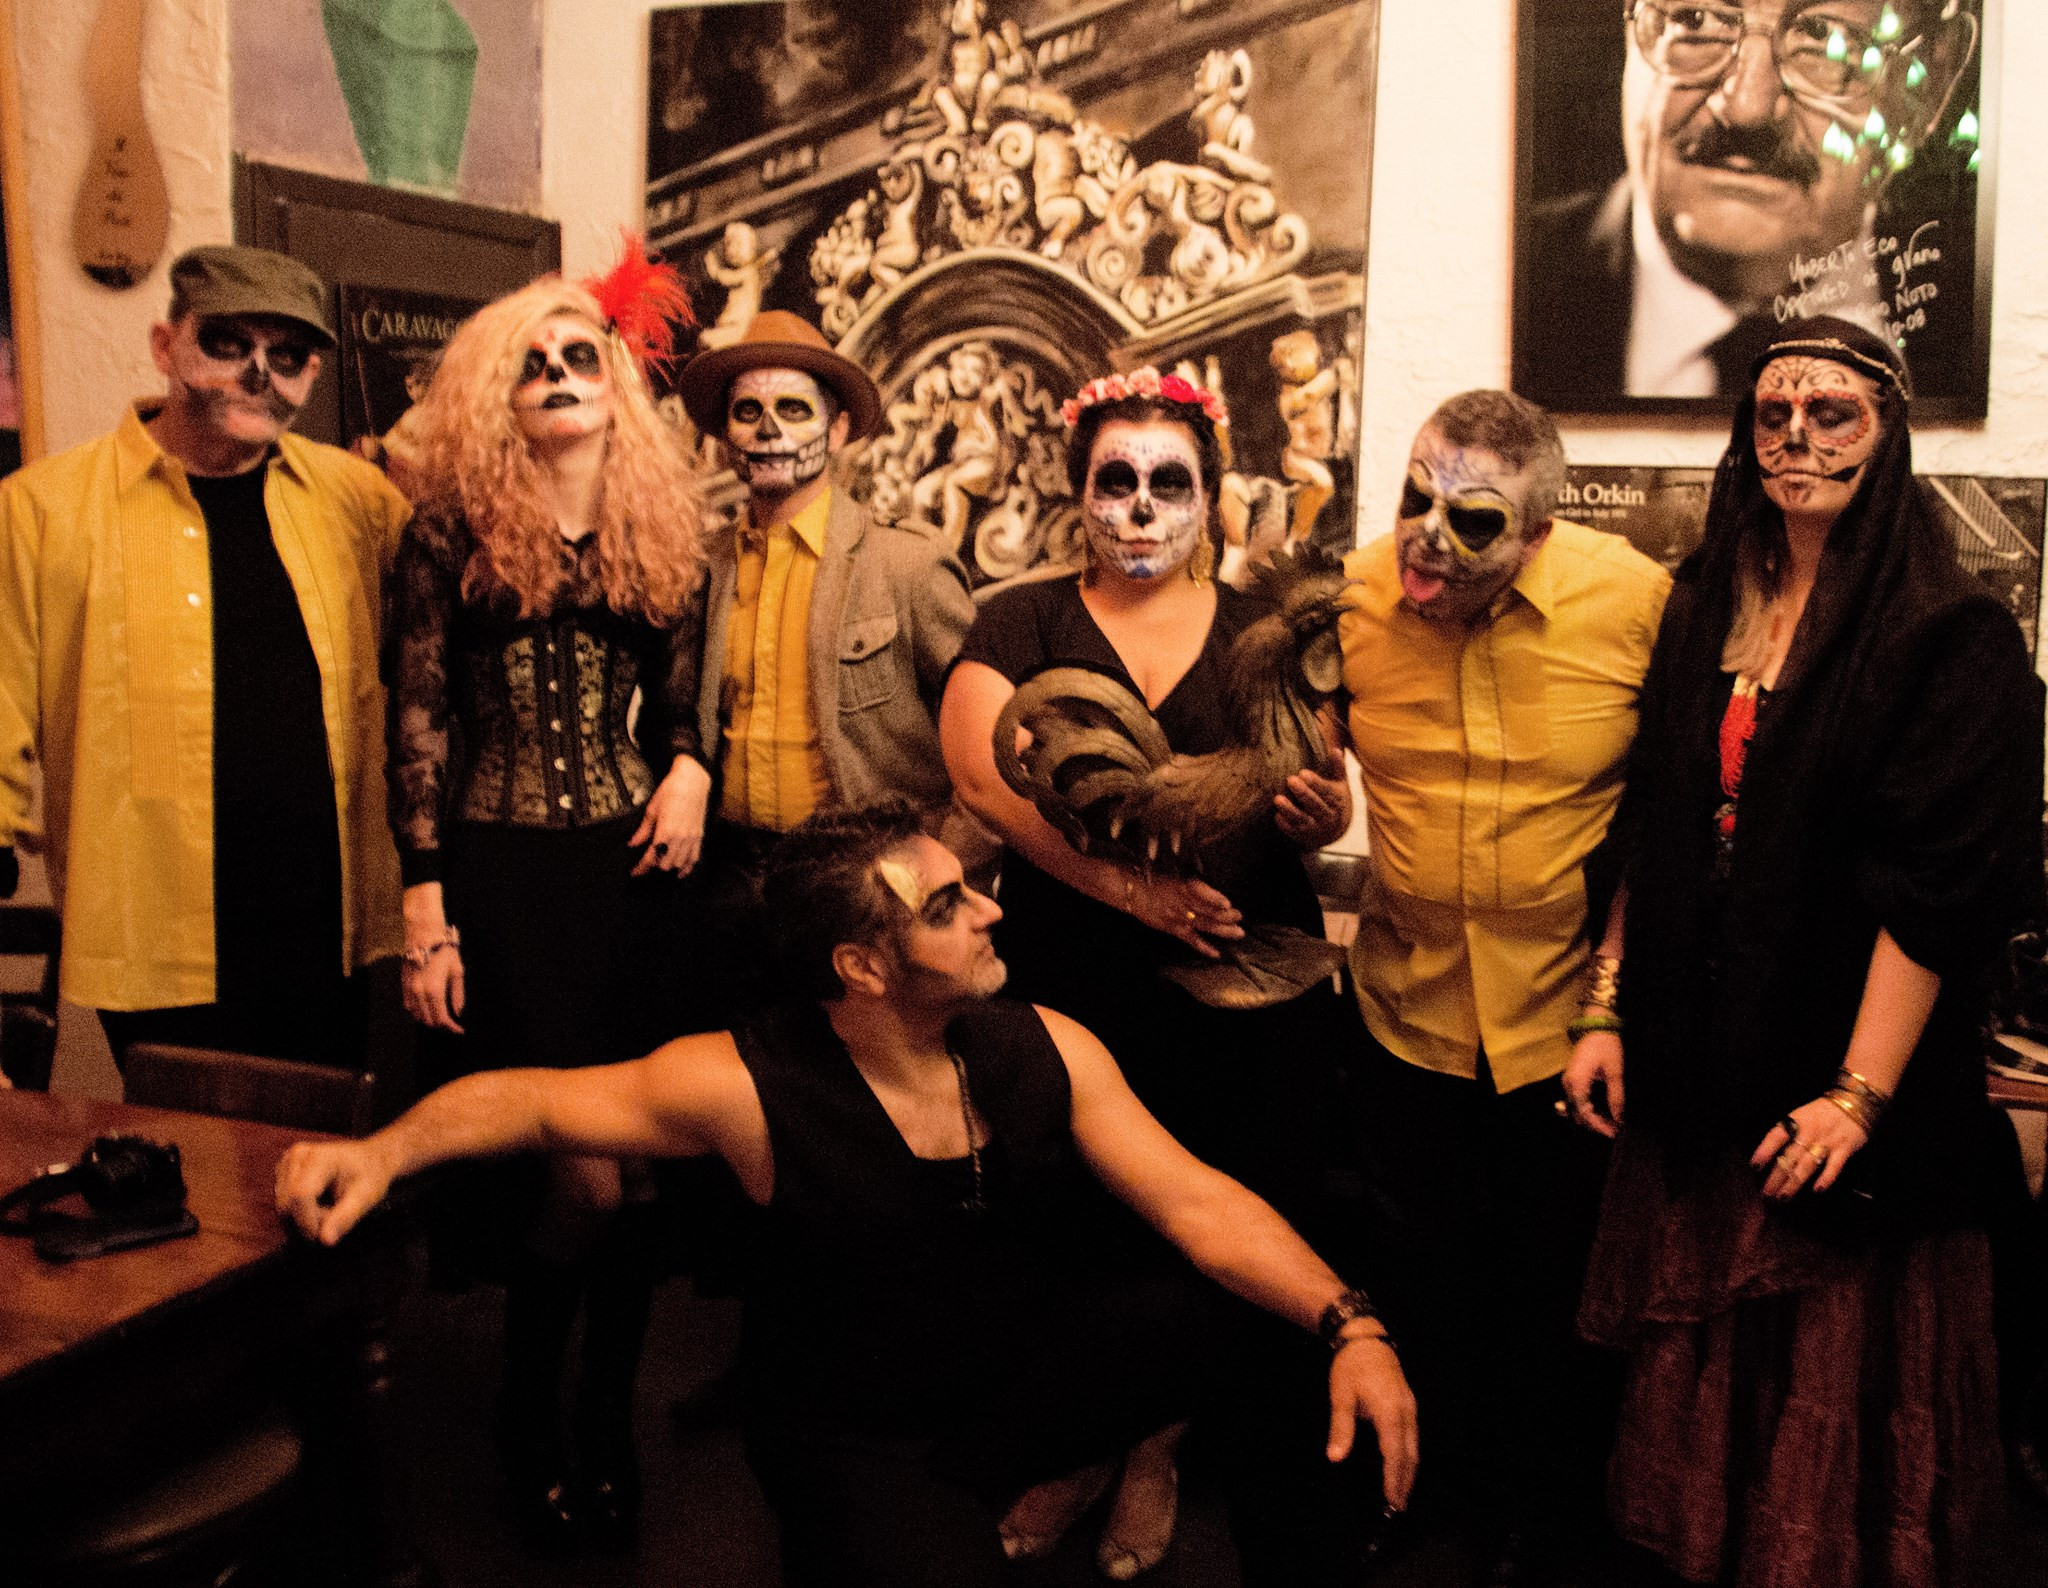 The day of the Dead performance at Grano, Toronto.